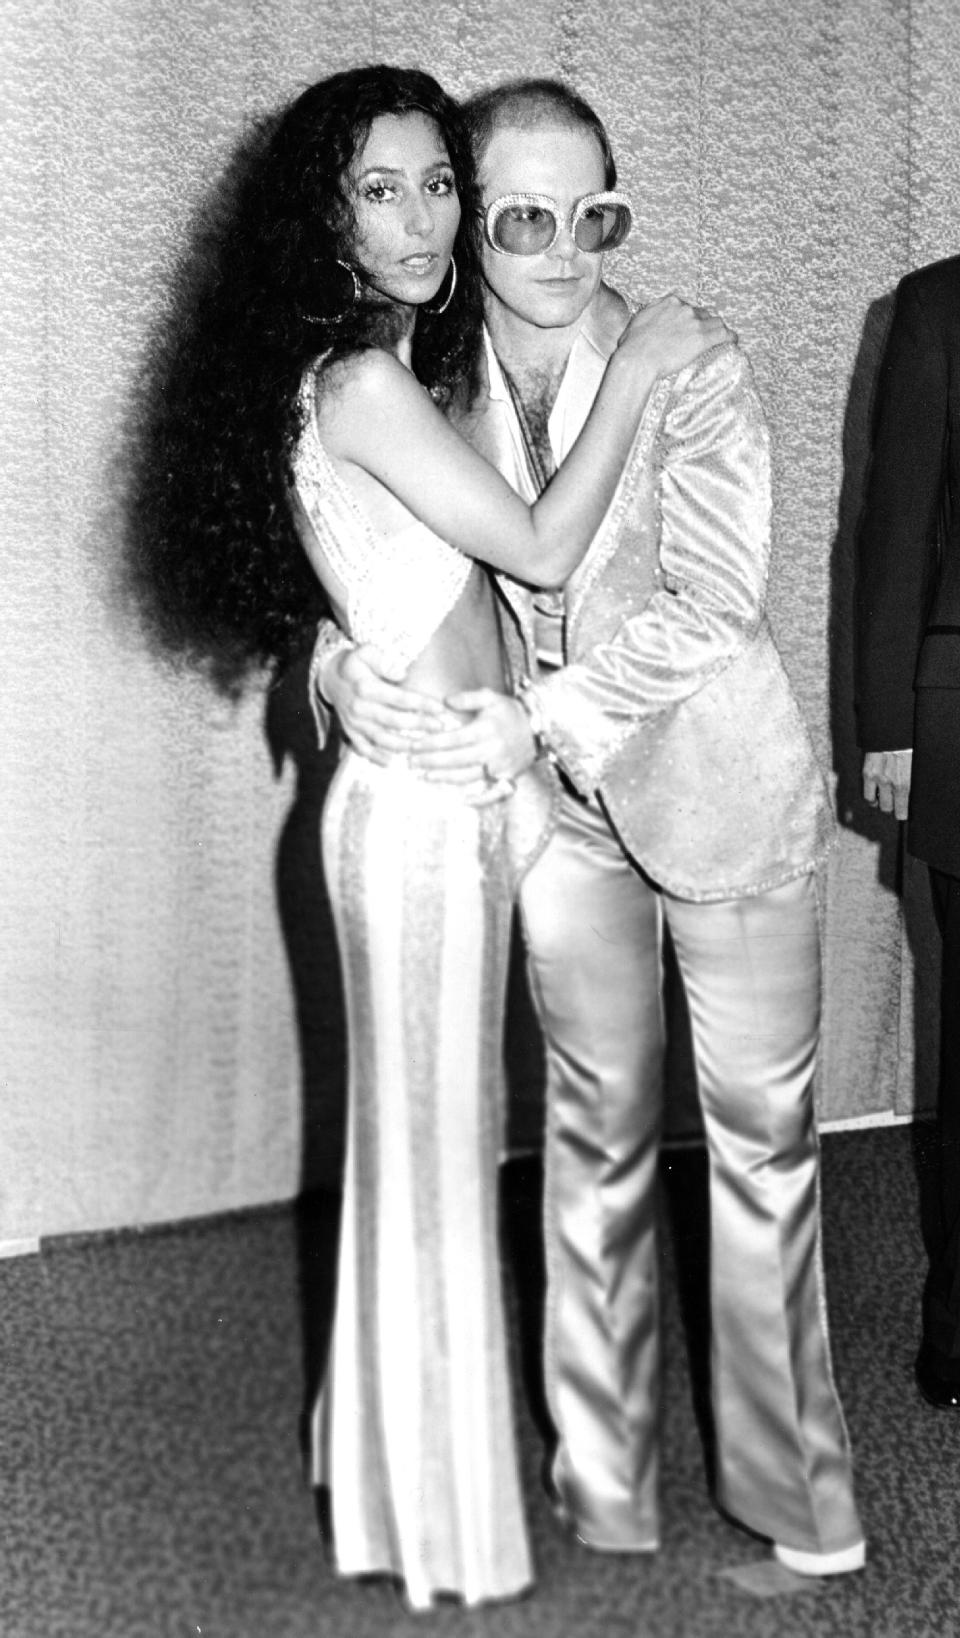 Cher and Elton John pose for a portrait backstage at an awards show.